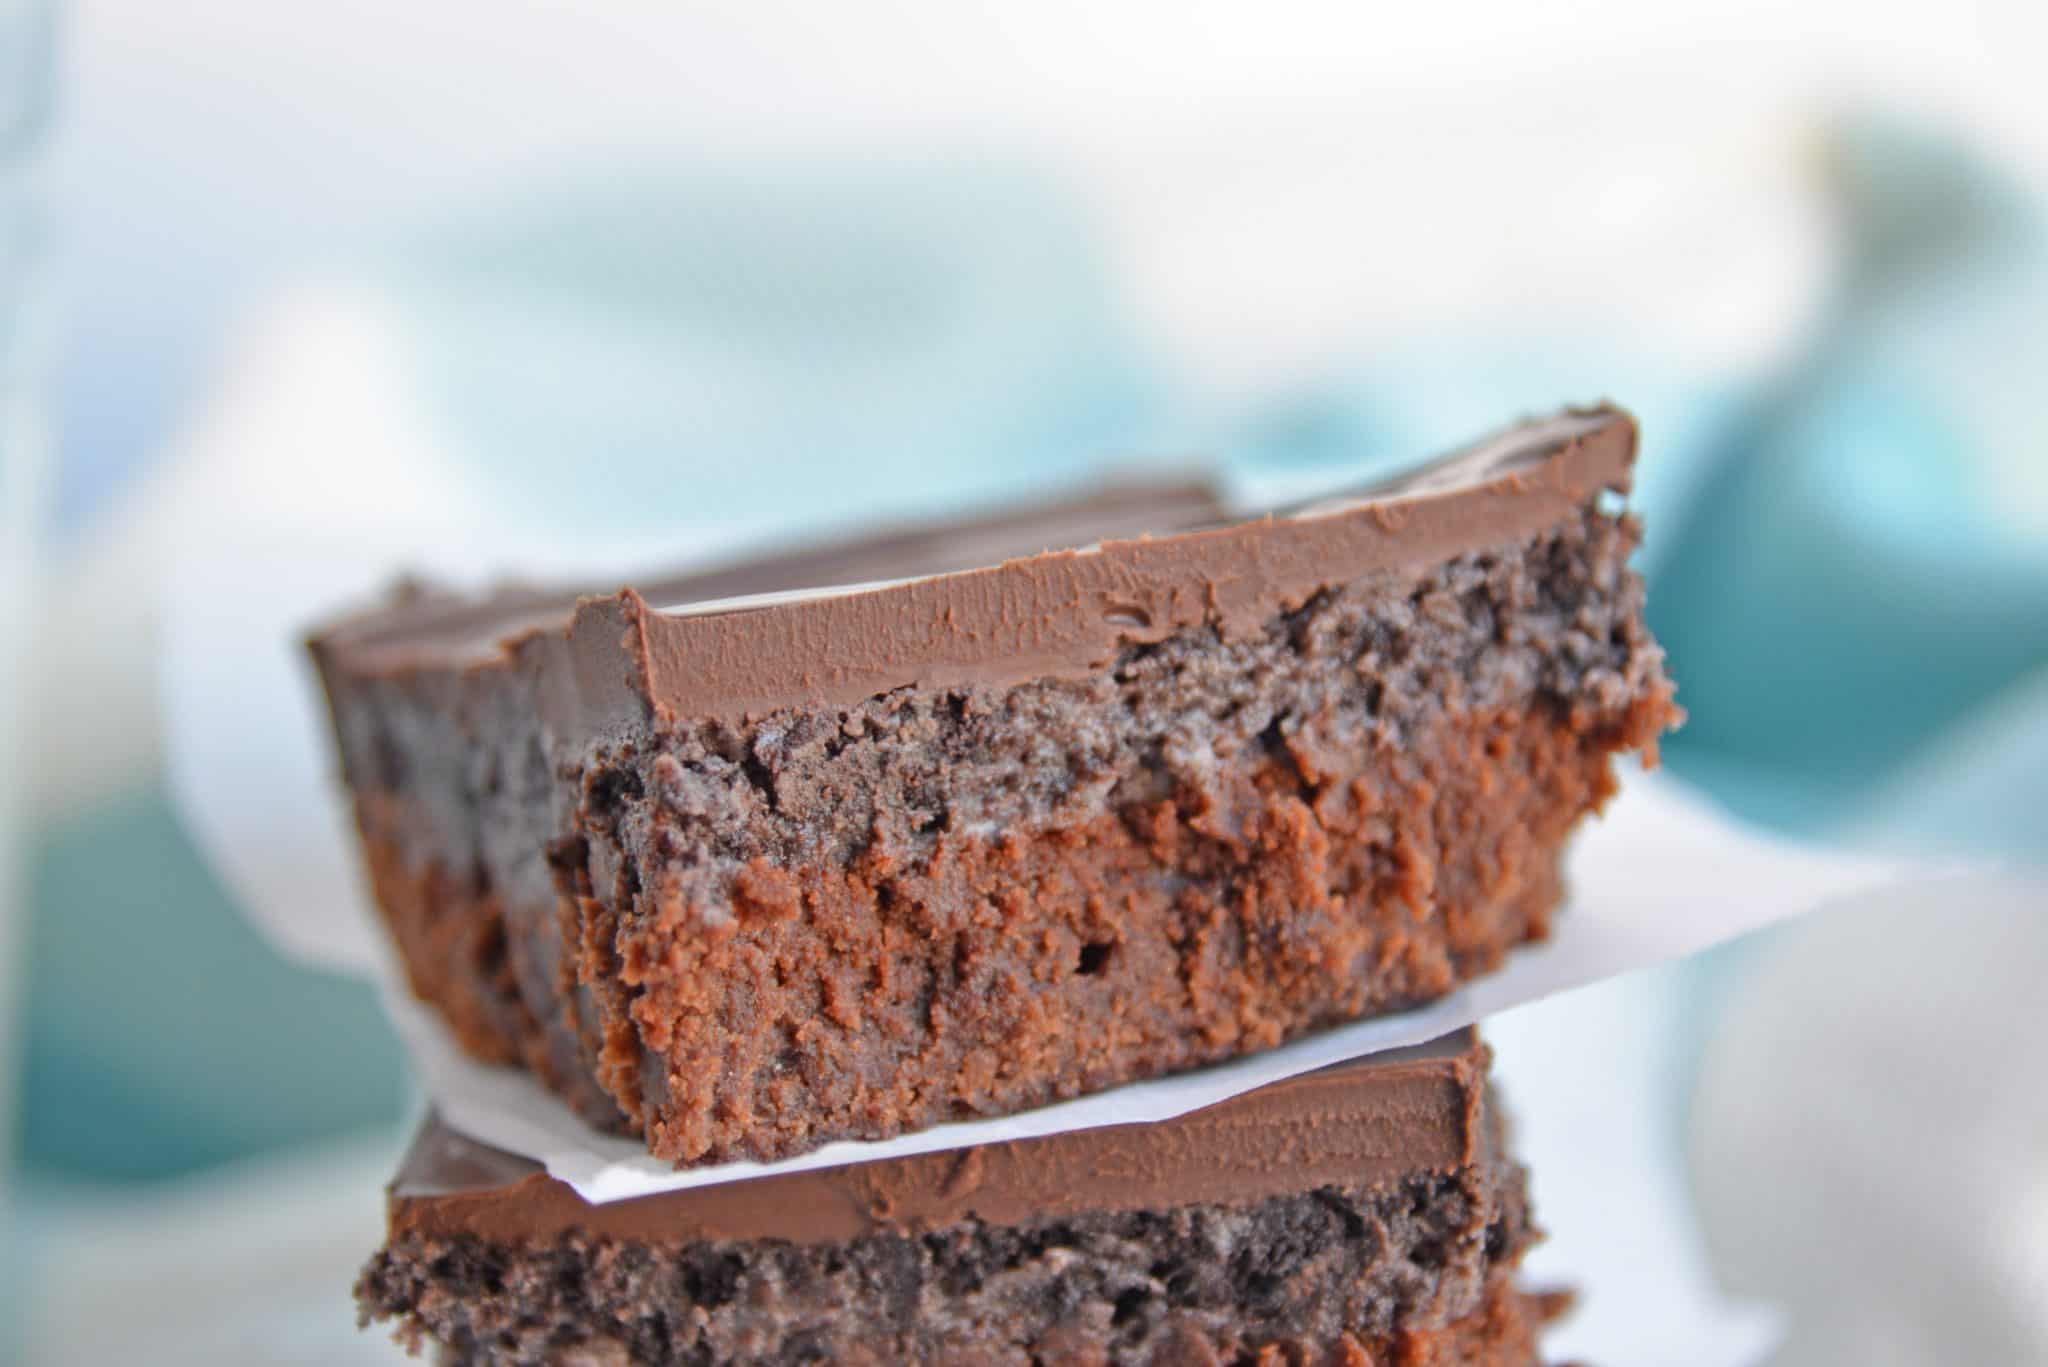 Fudgy Brownie Bars are an easy dessert recipe with layers of brownie, cookie and chocolate ganache, the ultimate chocolate lovers dream! #fudgybrownies #cookiebrownies www.savoryexperiments.com